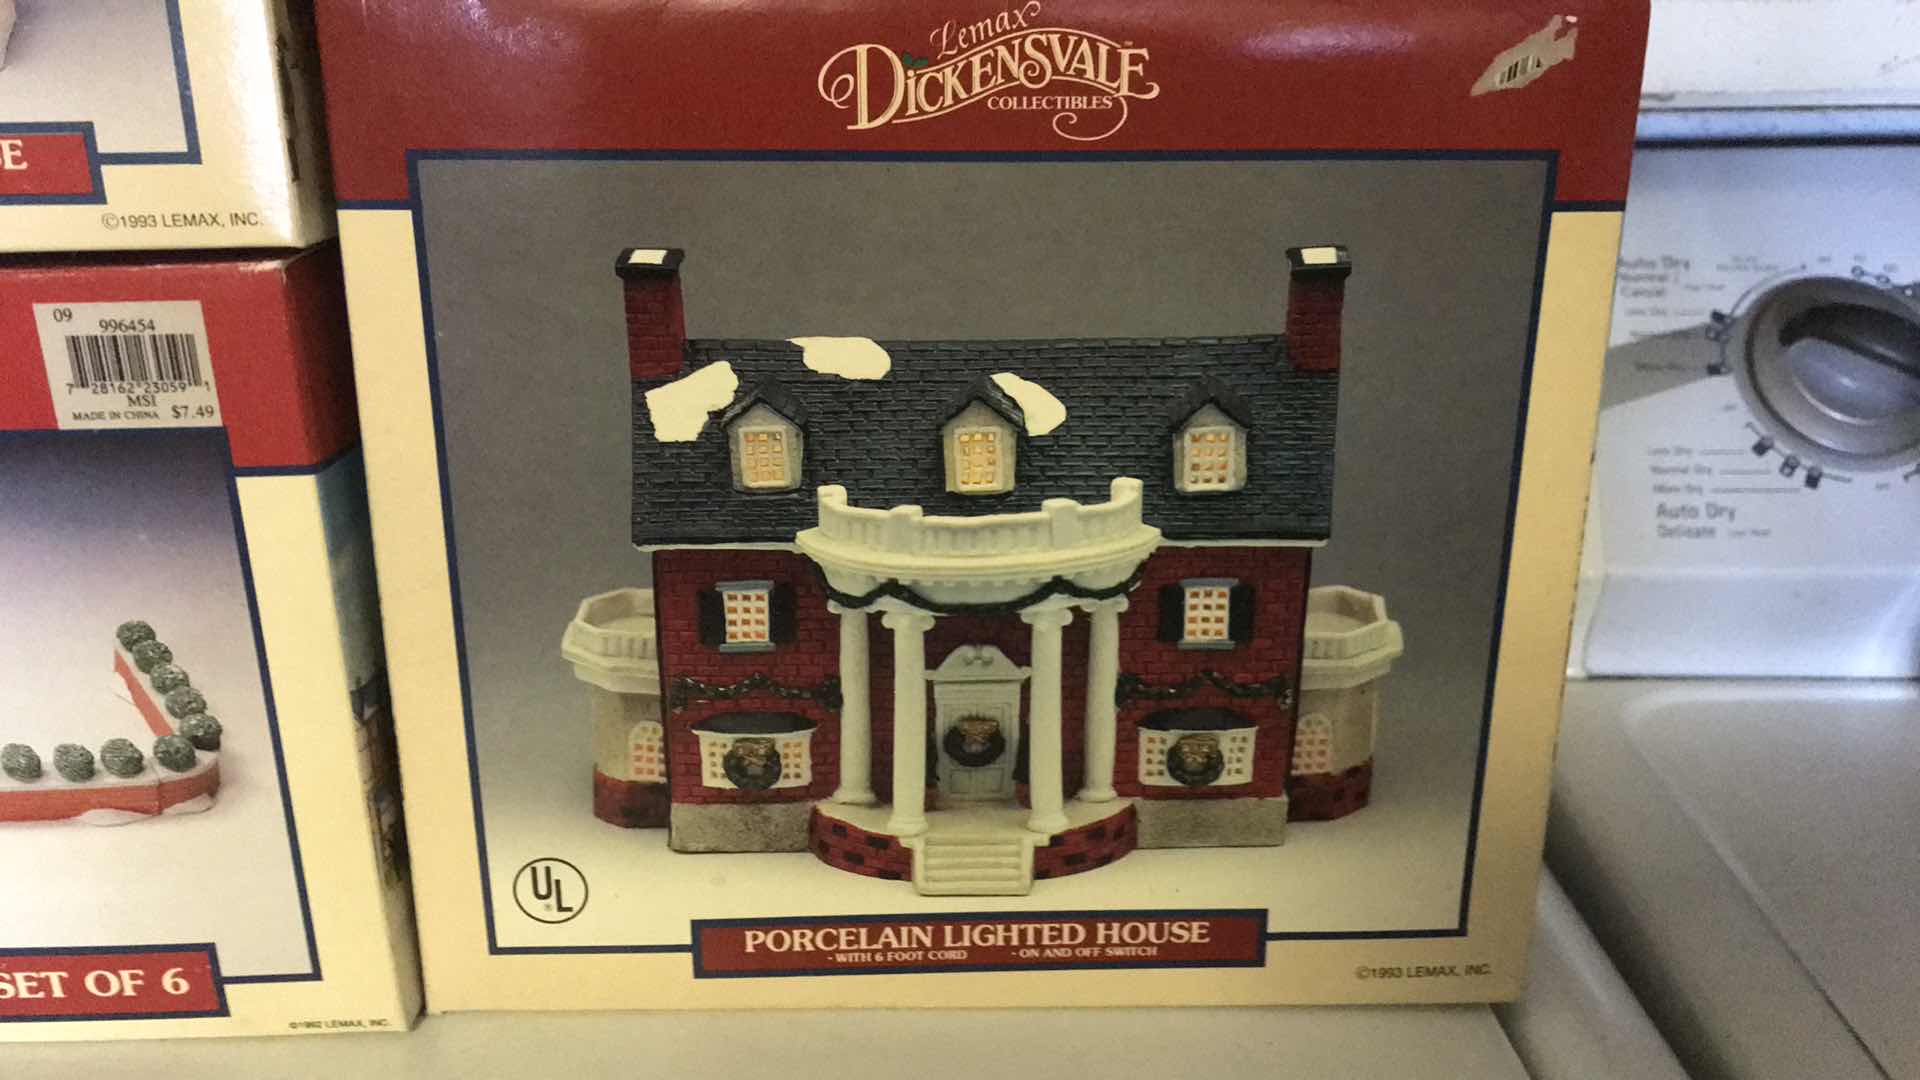 Photo 4 of LEMAX DICKENSVALE COLLECTABLES PORCELAIN LIGHTED HOUSES AND BRICK WALL